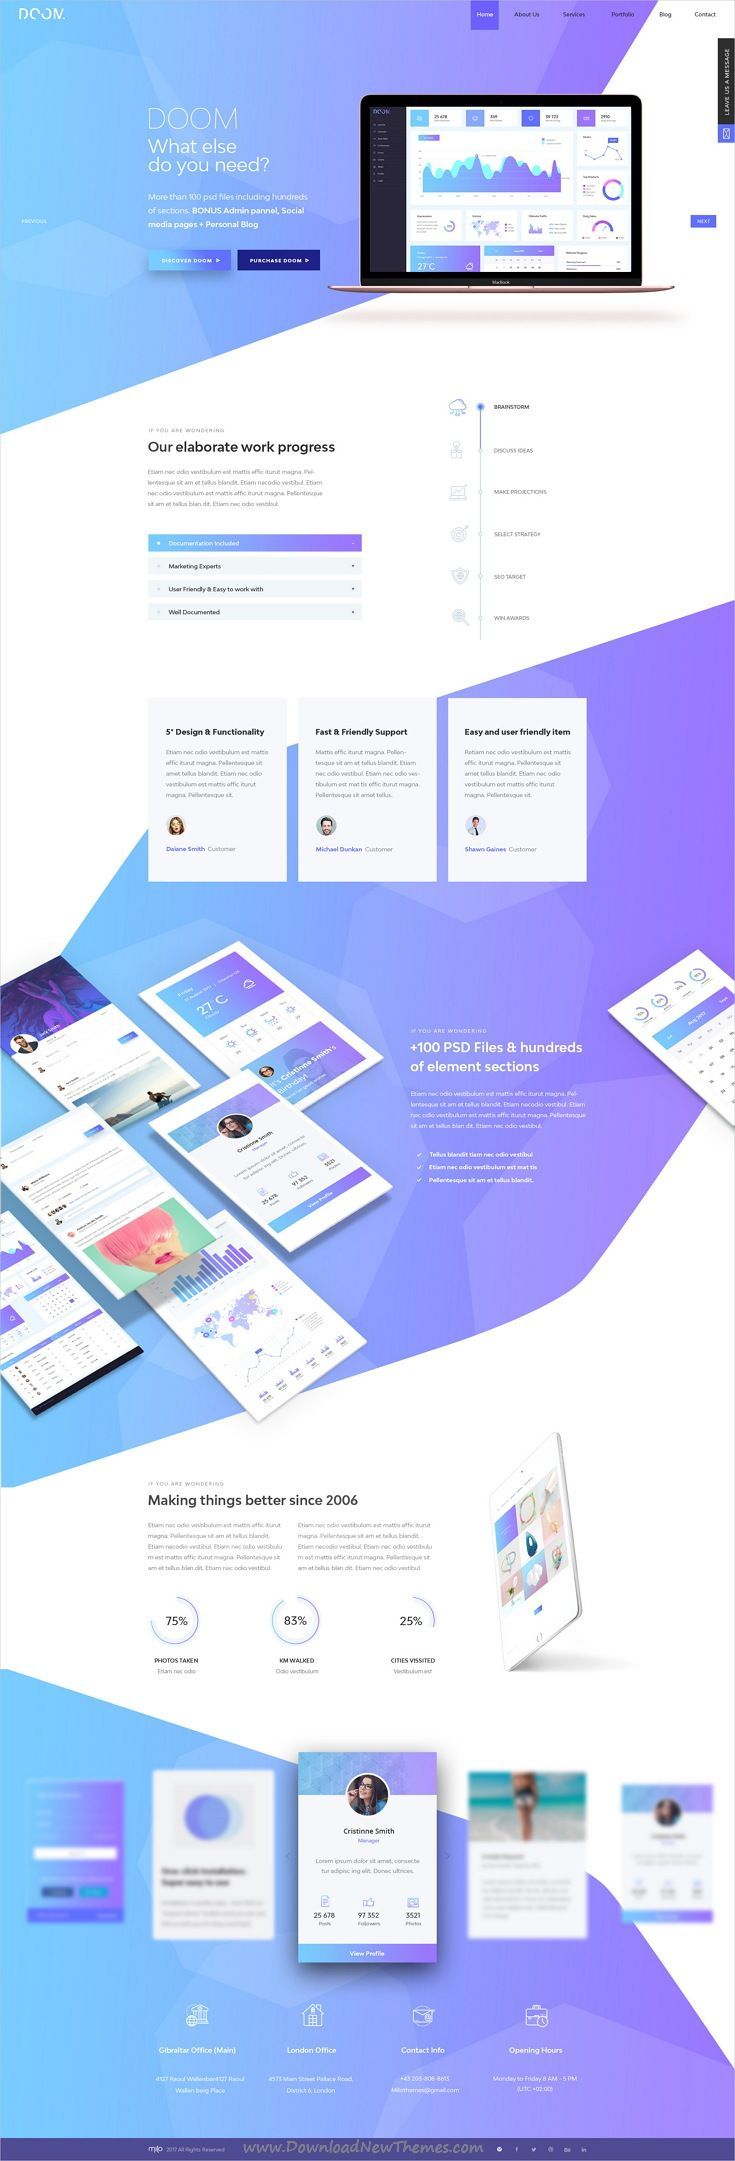 Doom is massive all in one PSD pack template for stunning #app #landingpage webs...